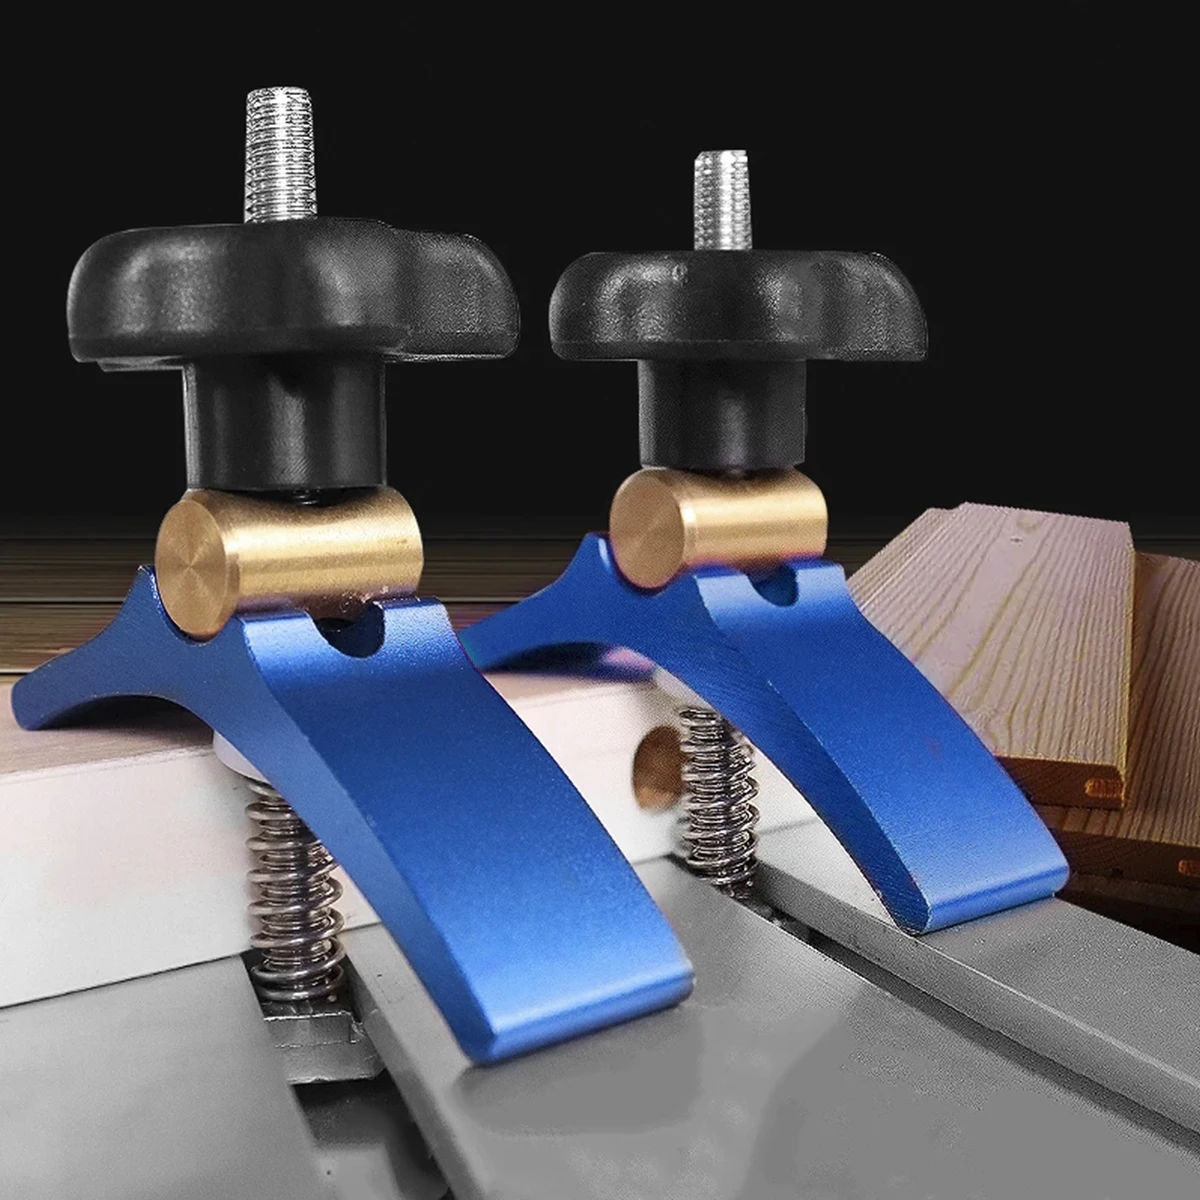 

2Pcs T-Slot Clamp Wear Resistant T-Track Clamp Mini Portable Universal Hold Down Clamp Carpentry CNC Router Machine Accessories